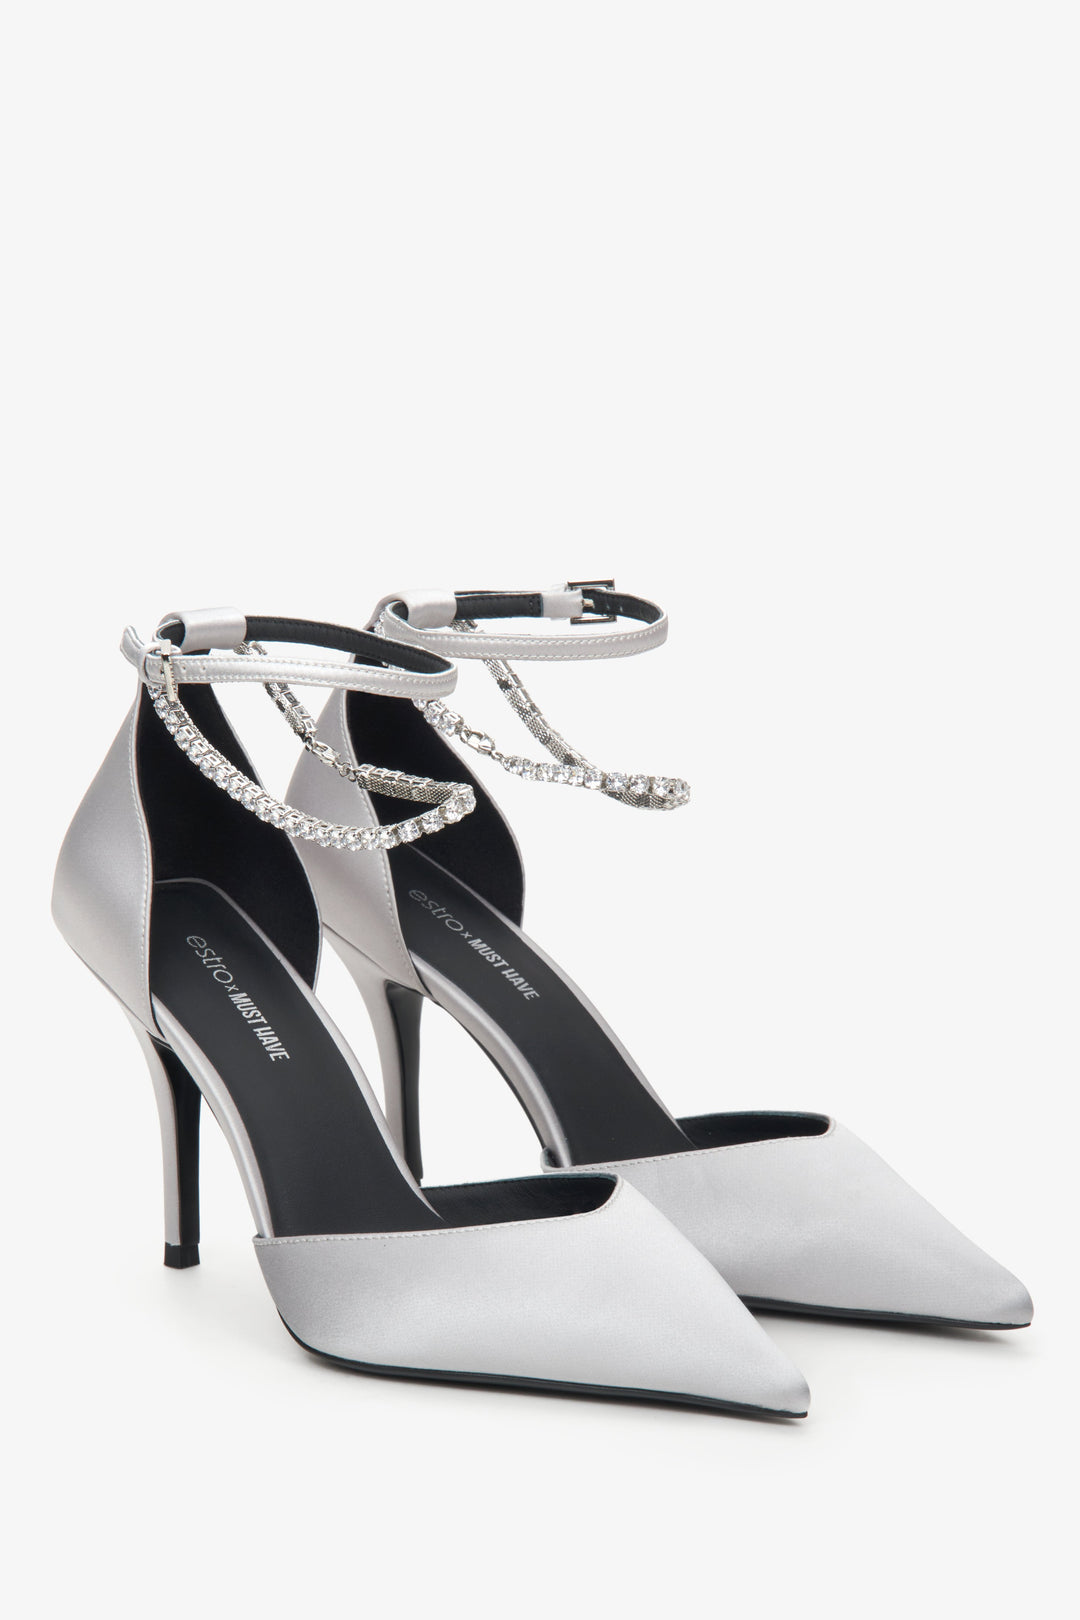 Women's grey pointed toe pumps with crystals Estro x MustHave.